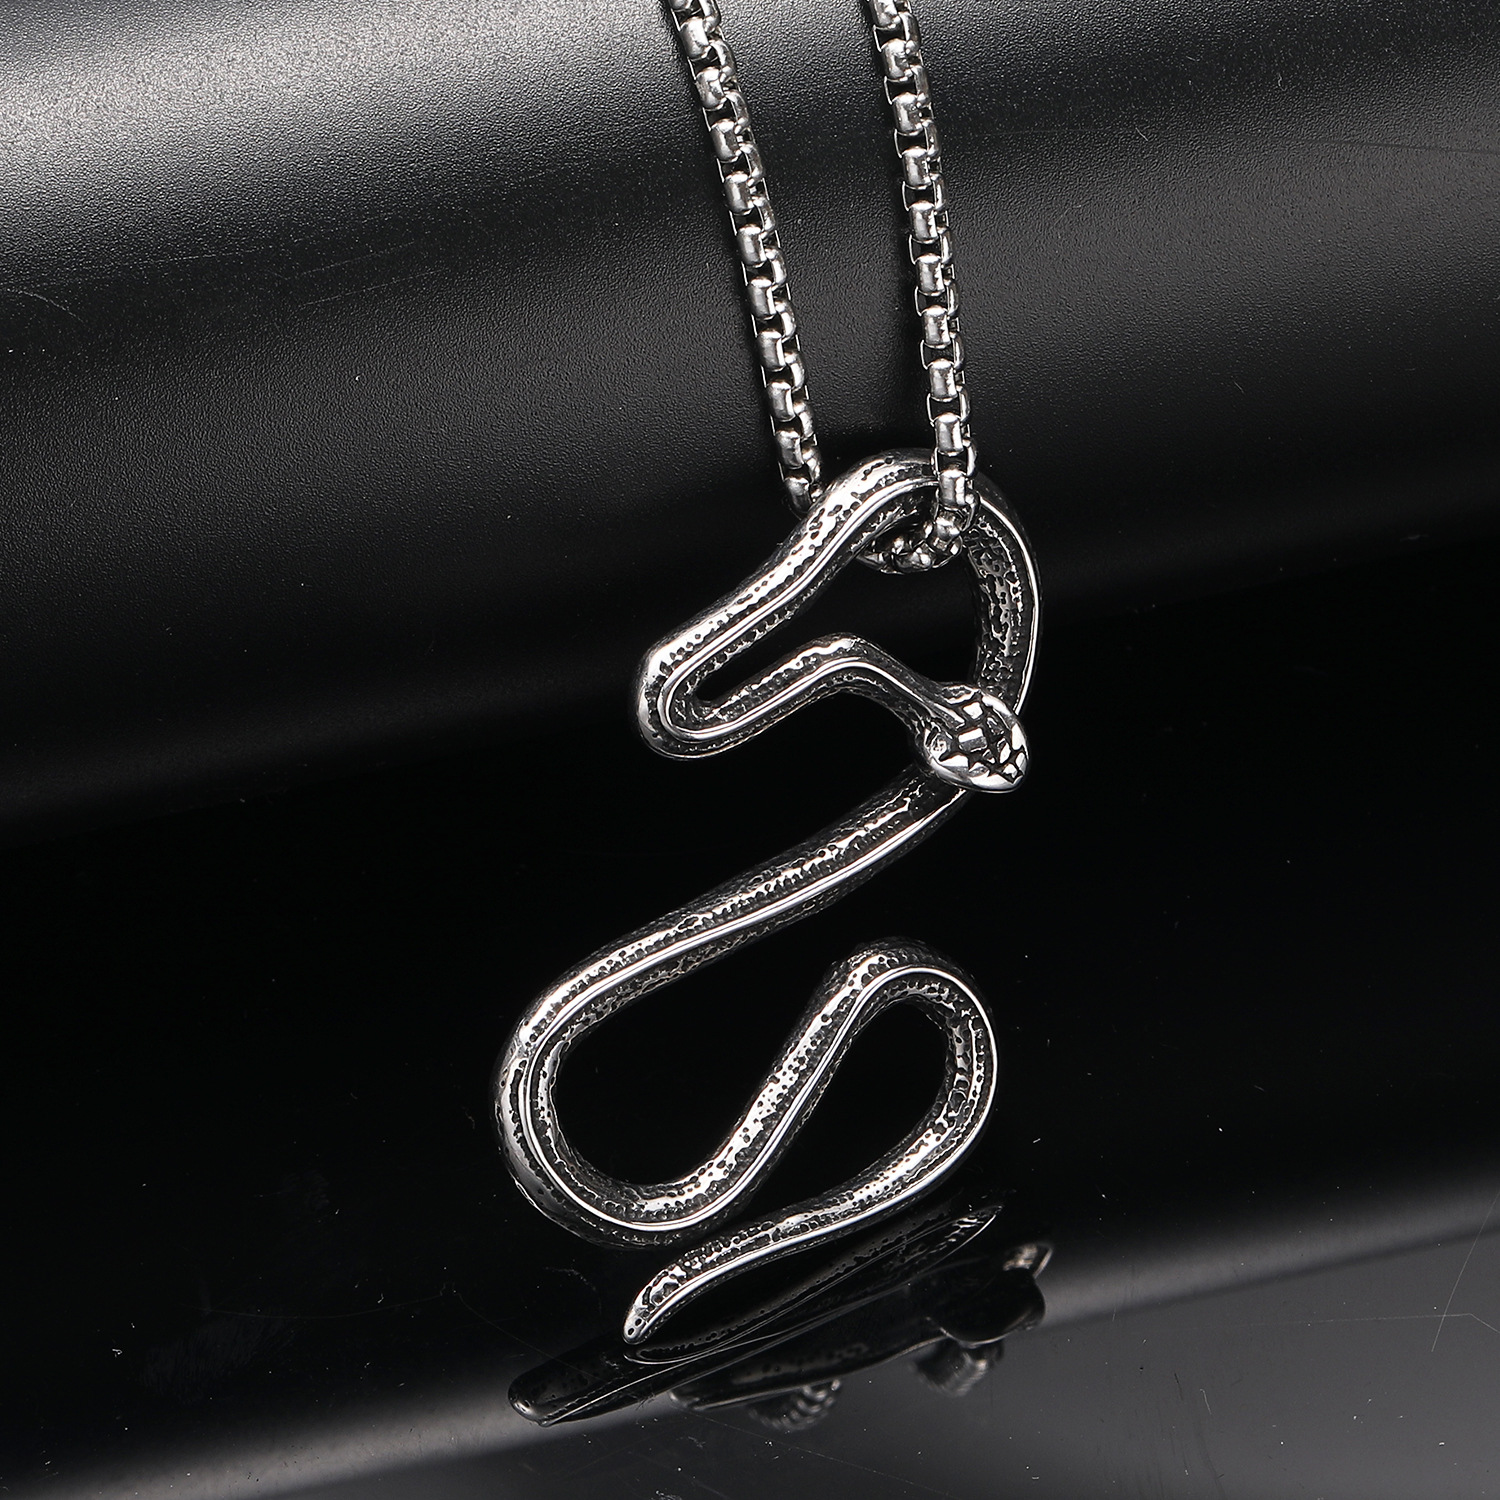 3:Steel pendant and steel 60cm square pearl chain